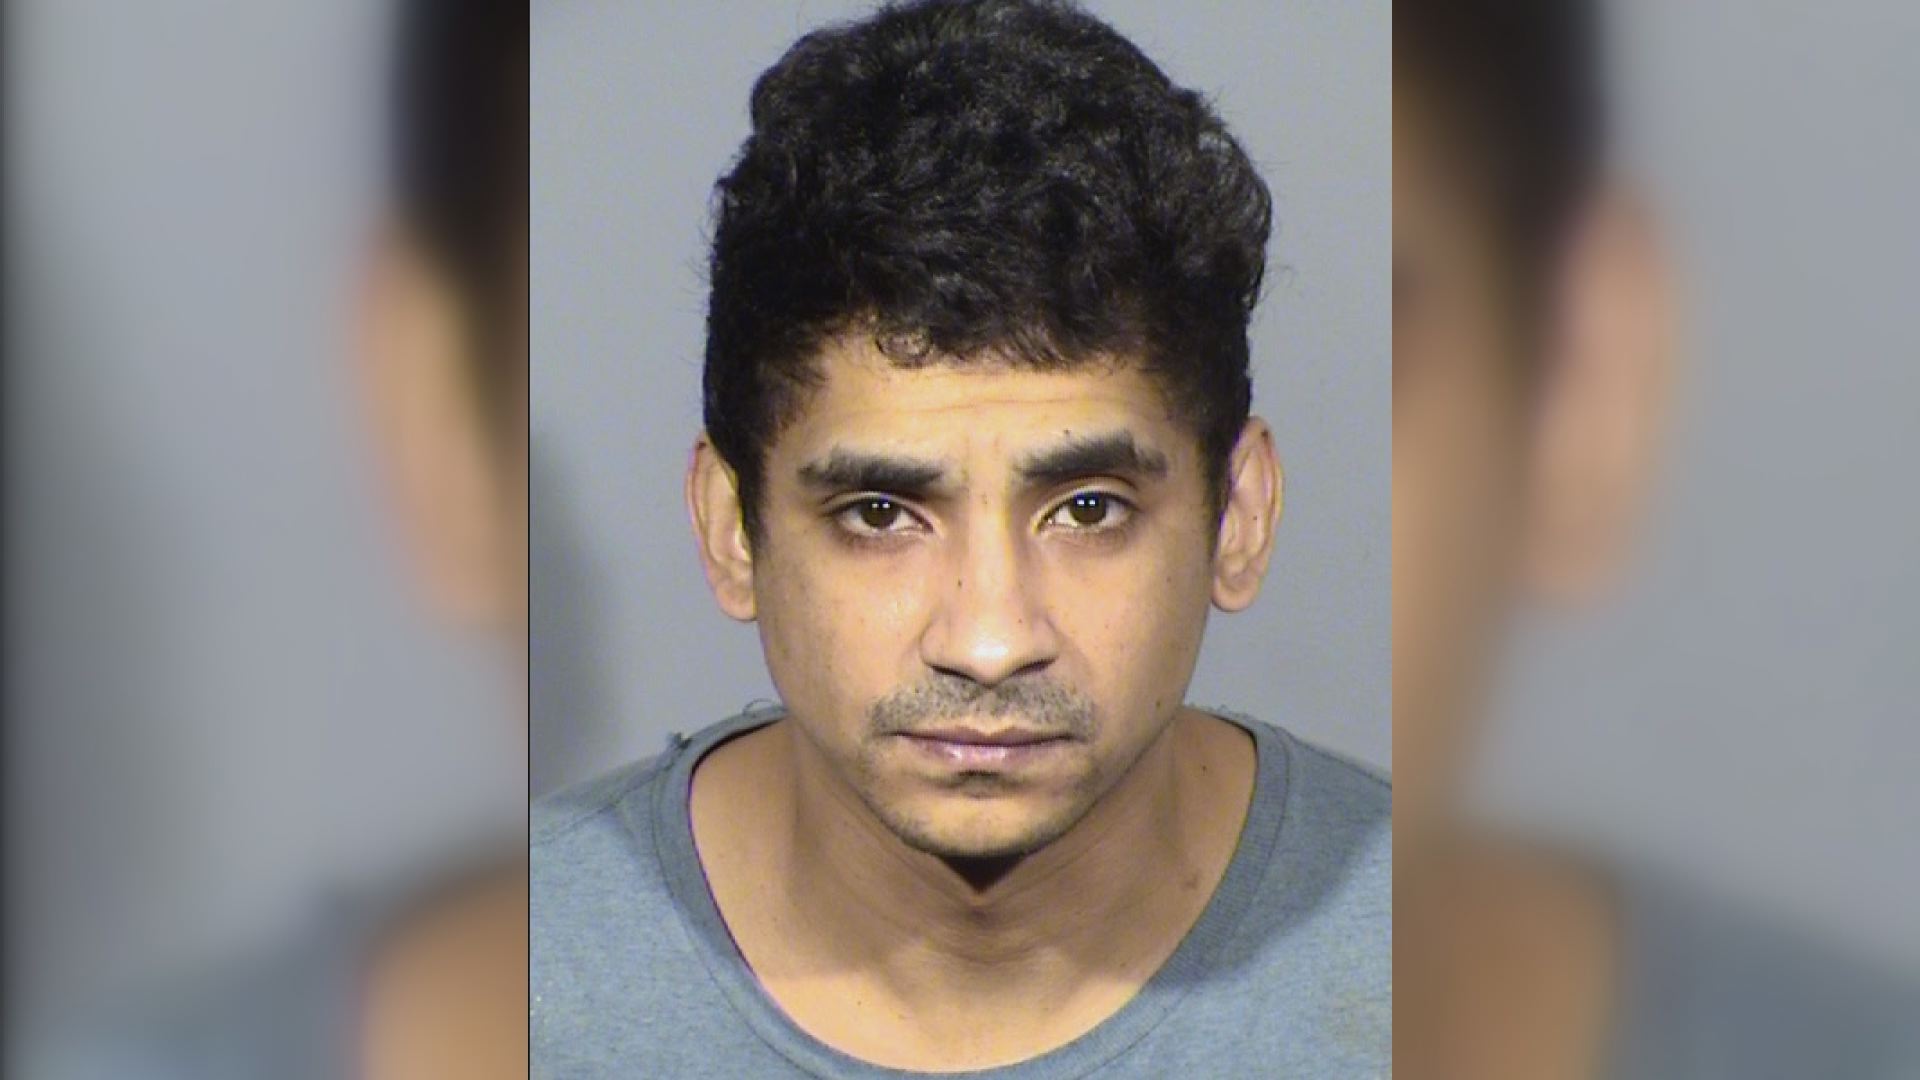 Childs body found in Centreville garage connected to sex trafficking arrest in Las Vegas ksdk picture